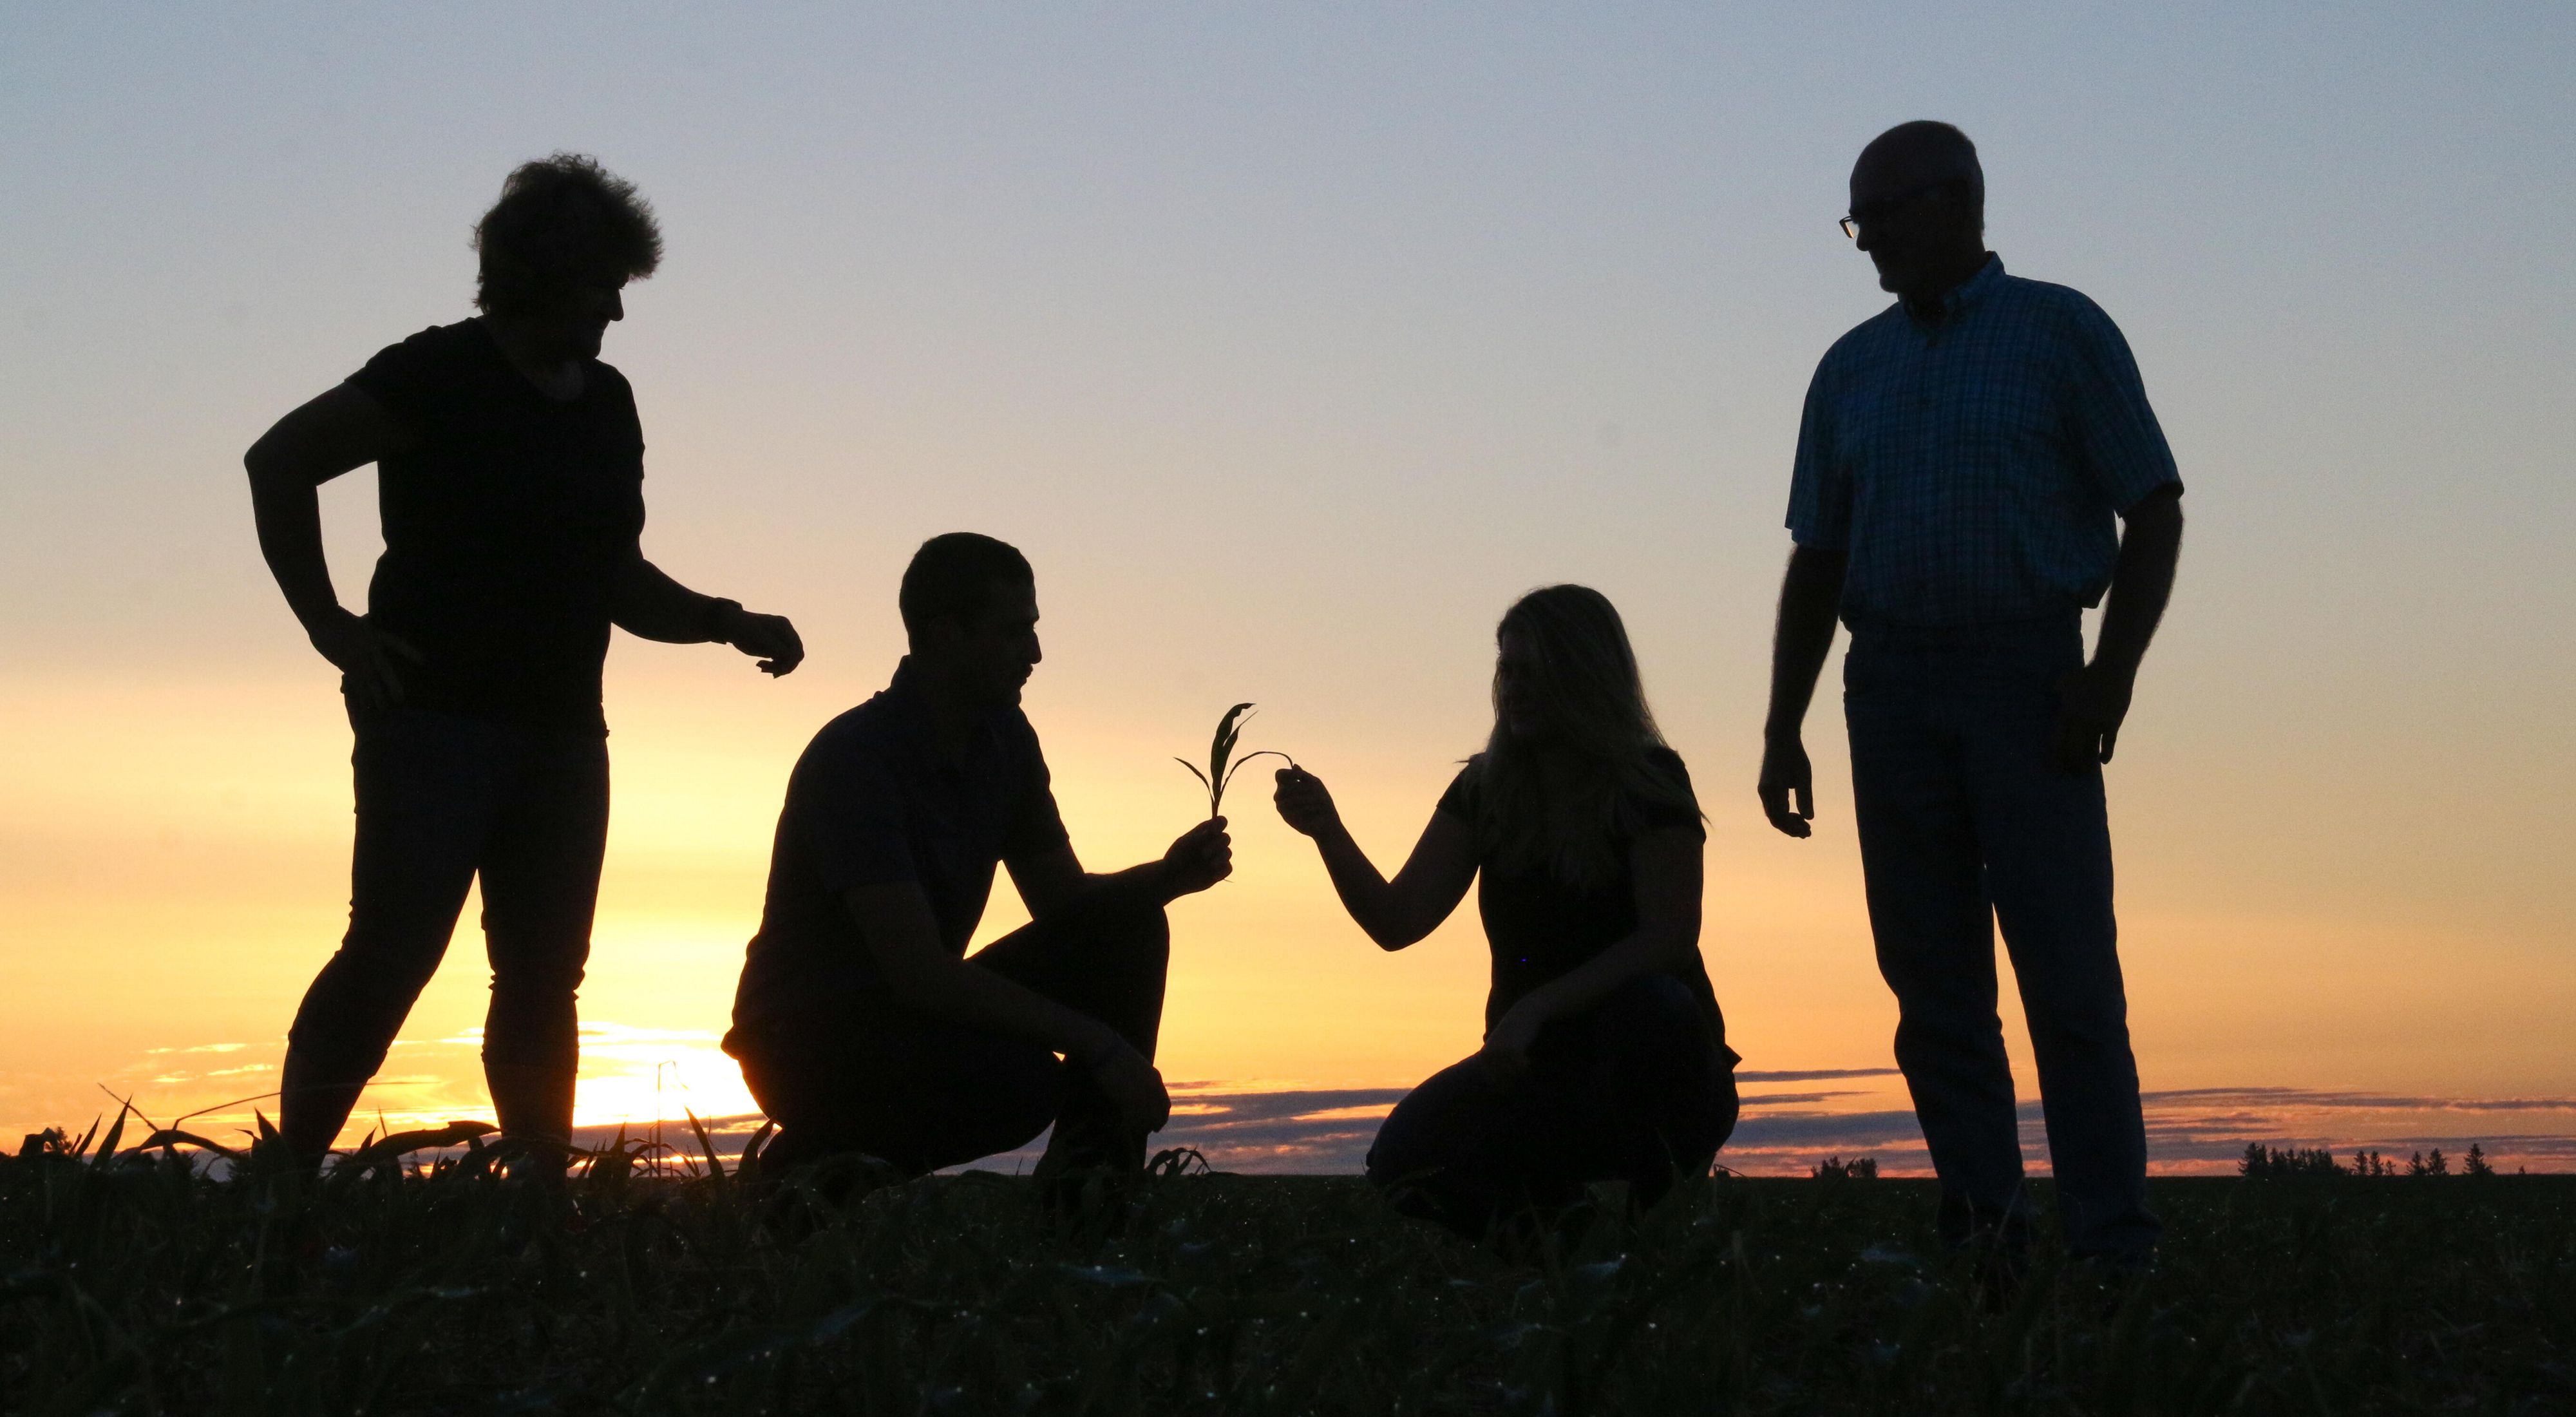 Photo of four people in silhouette of sunset in an Iowa farm field, holding a piece of wheat.